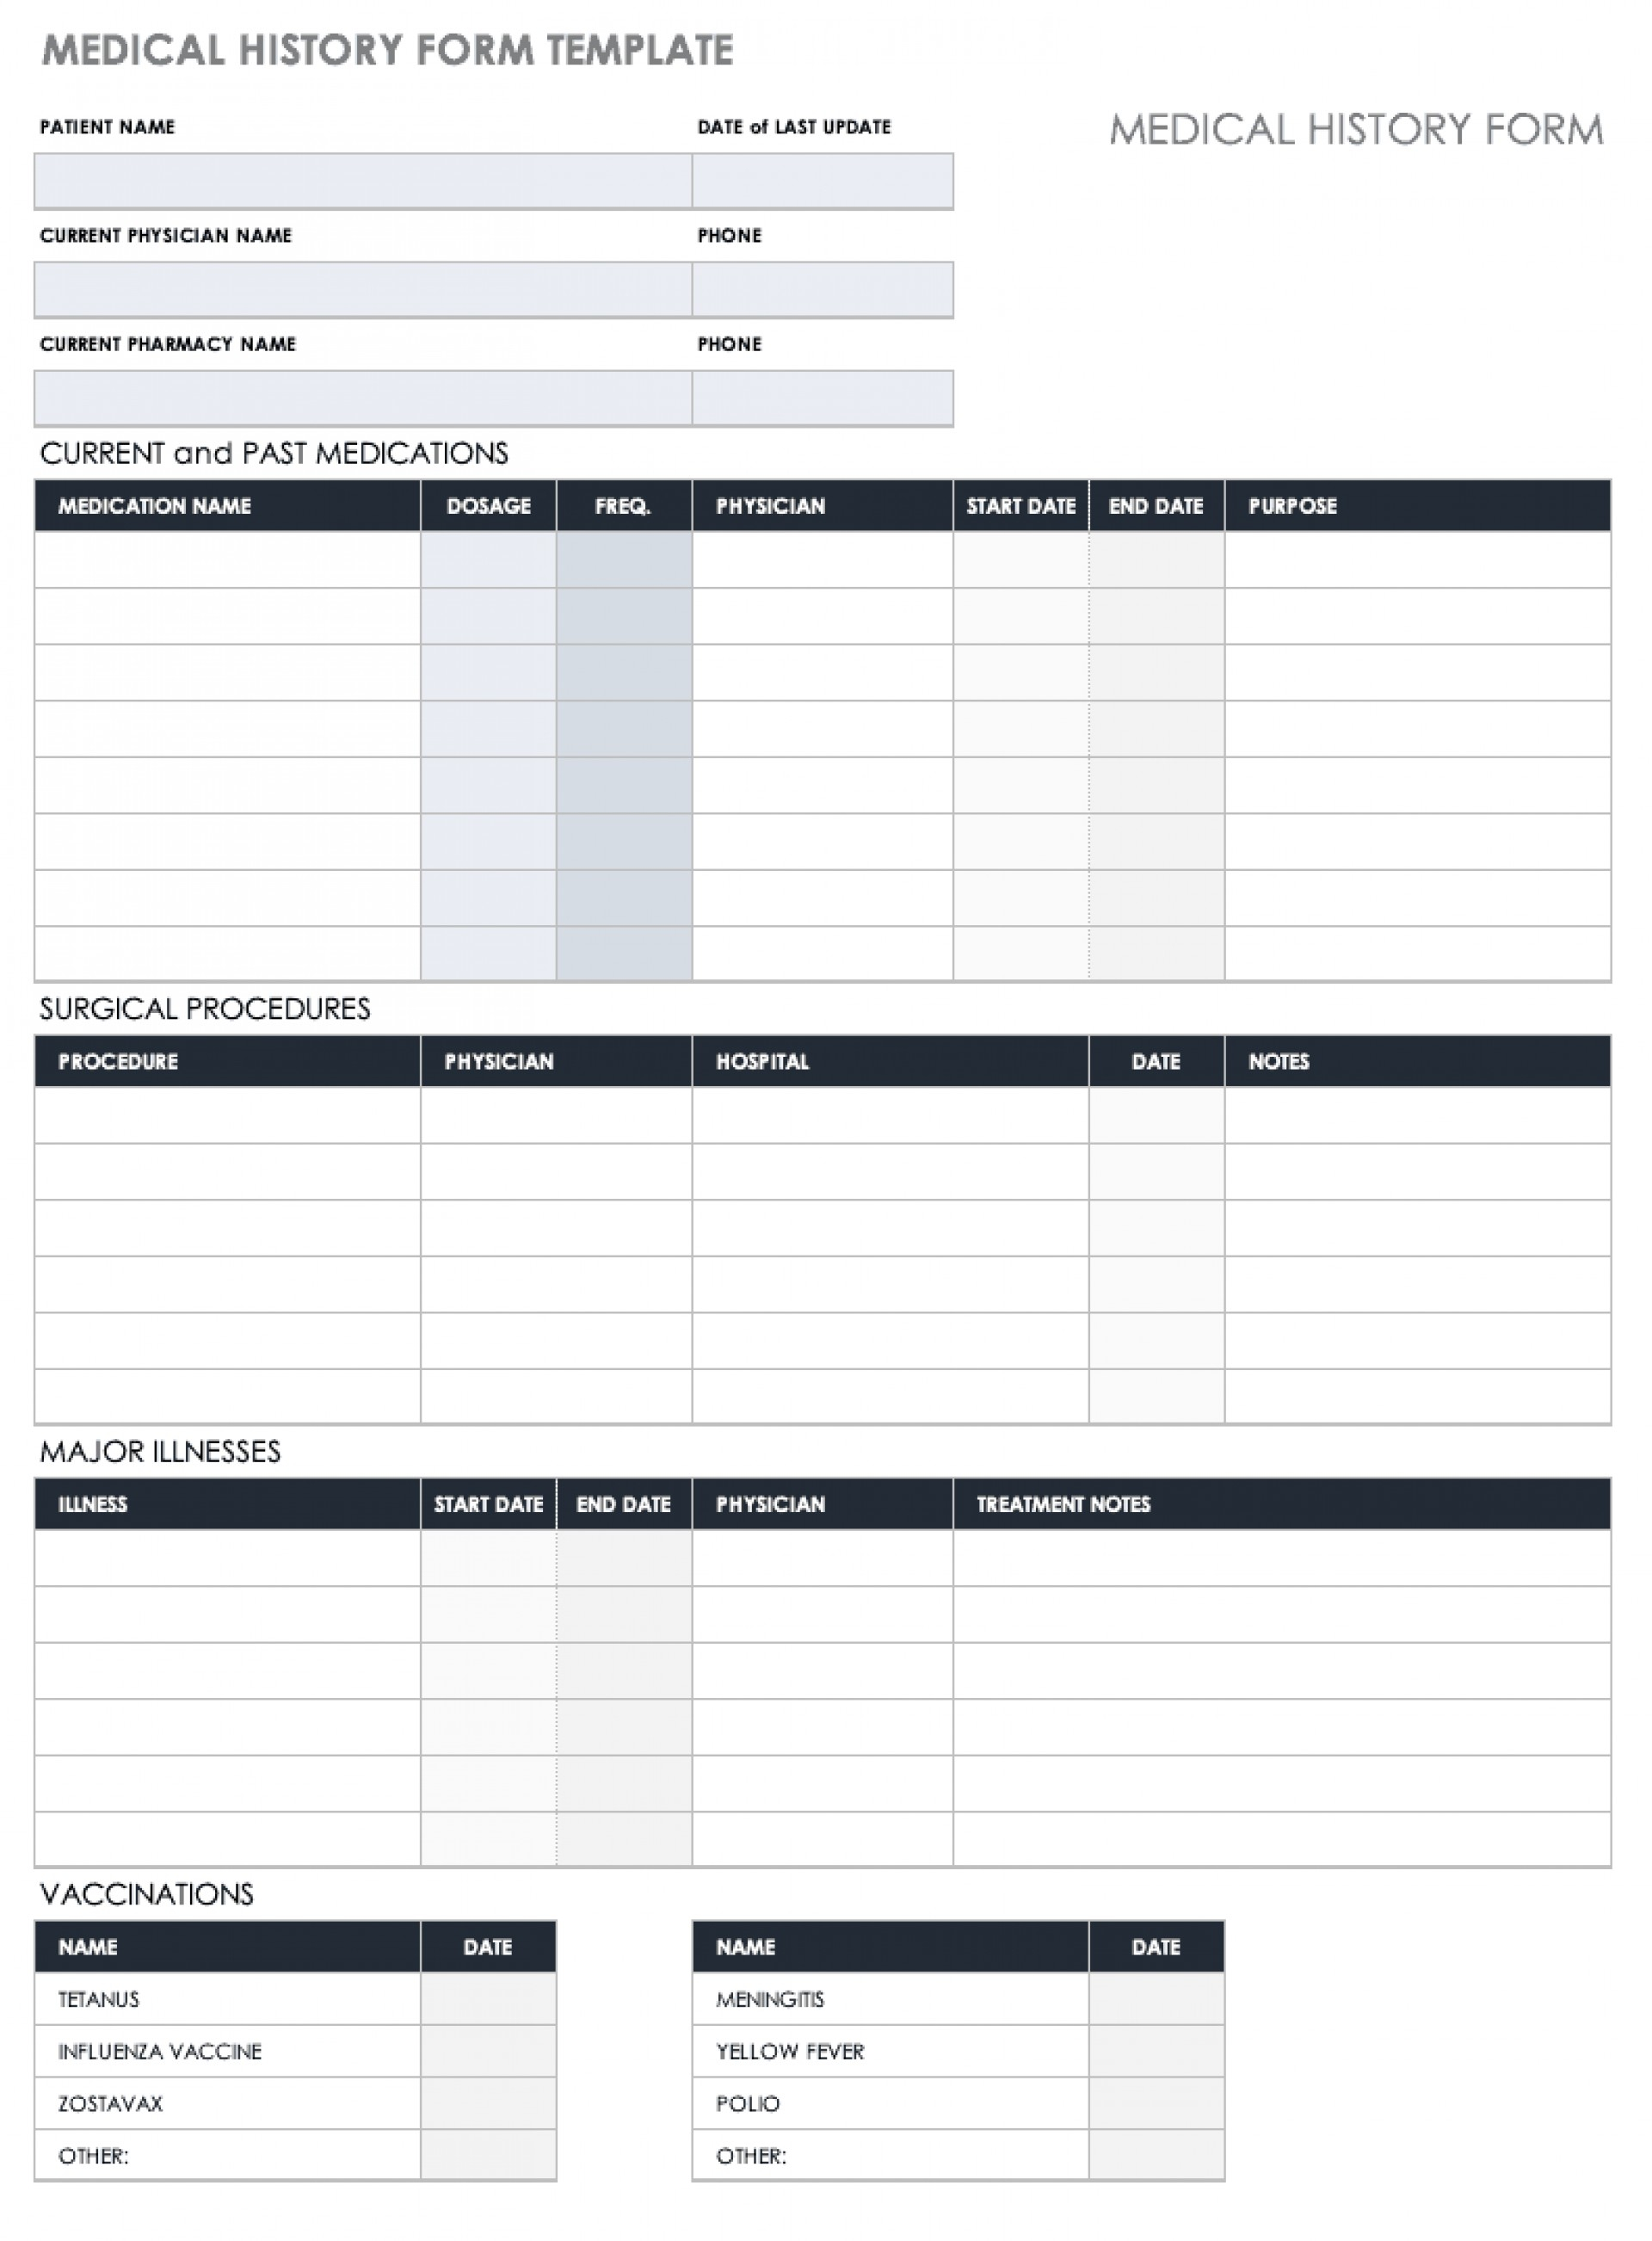 003 Personal Medical History Form Template Fearsome Ideas Intended For Medical History Template Word